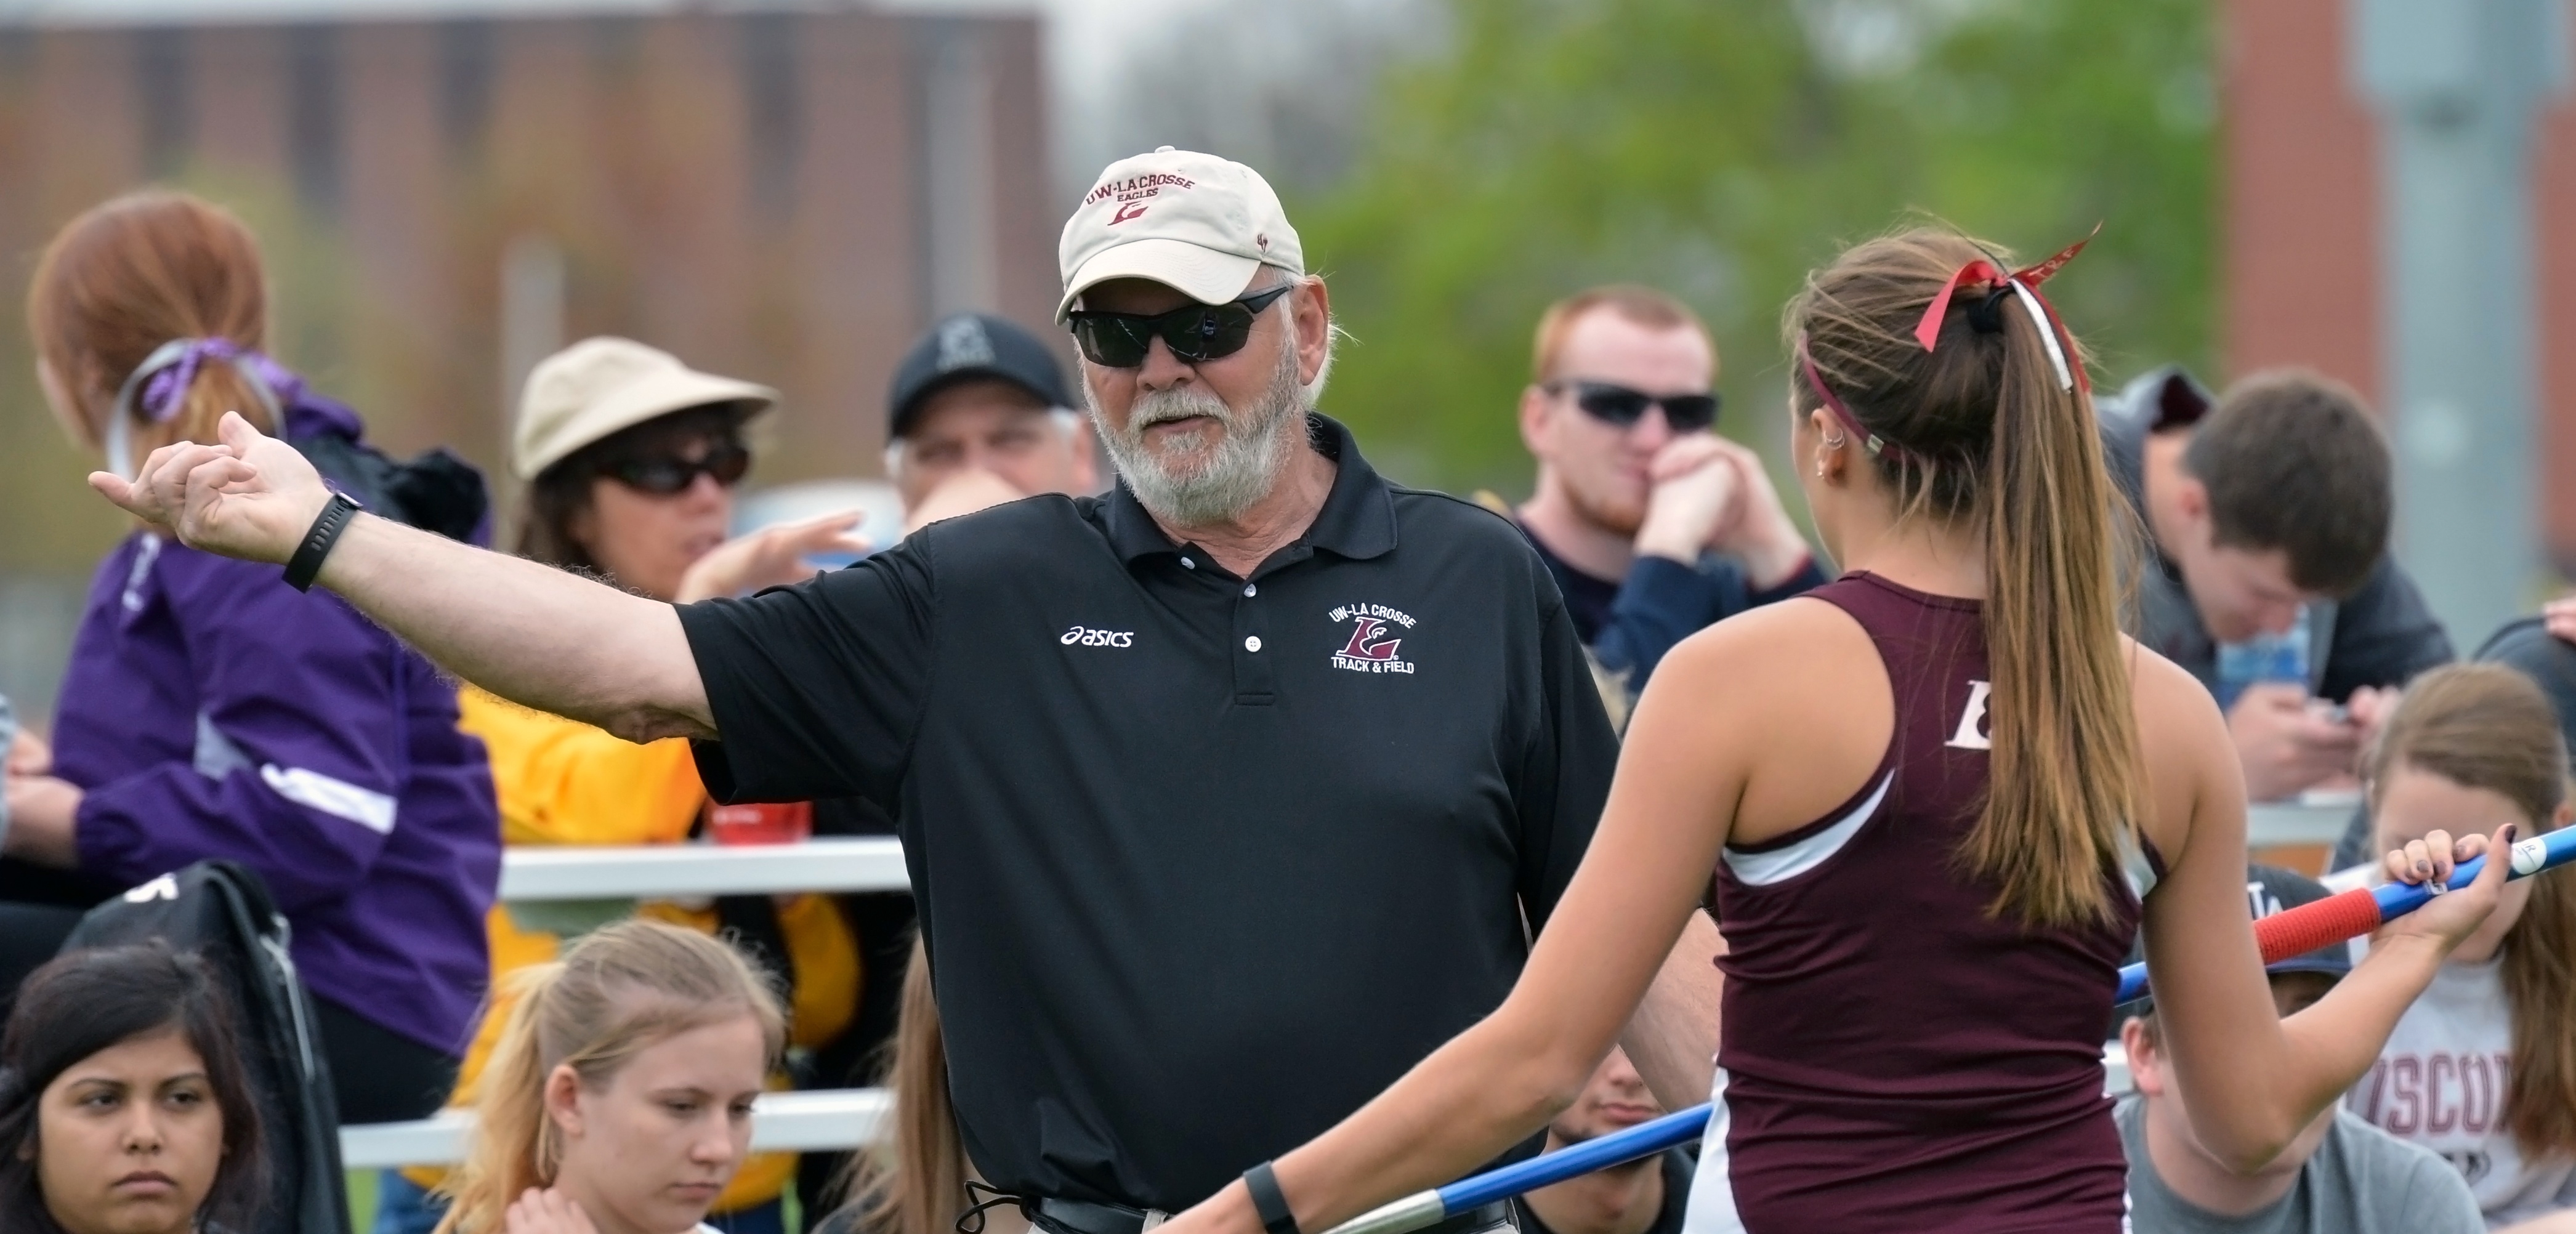 Longtime UW-L coach Pat Healy retiring after NCAA championships this weekend